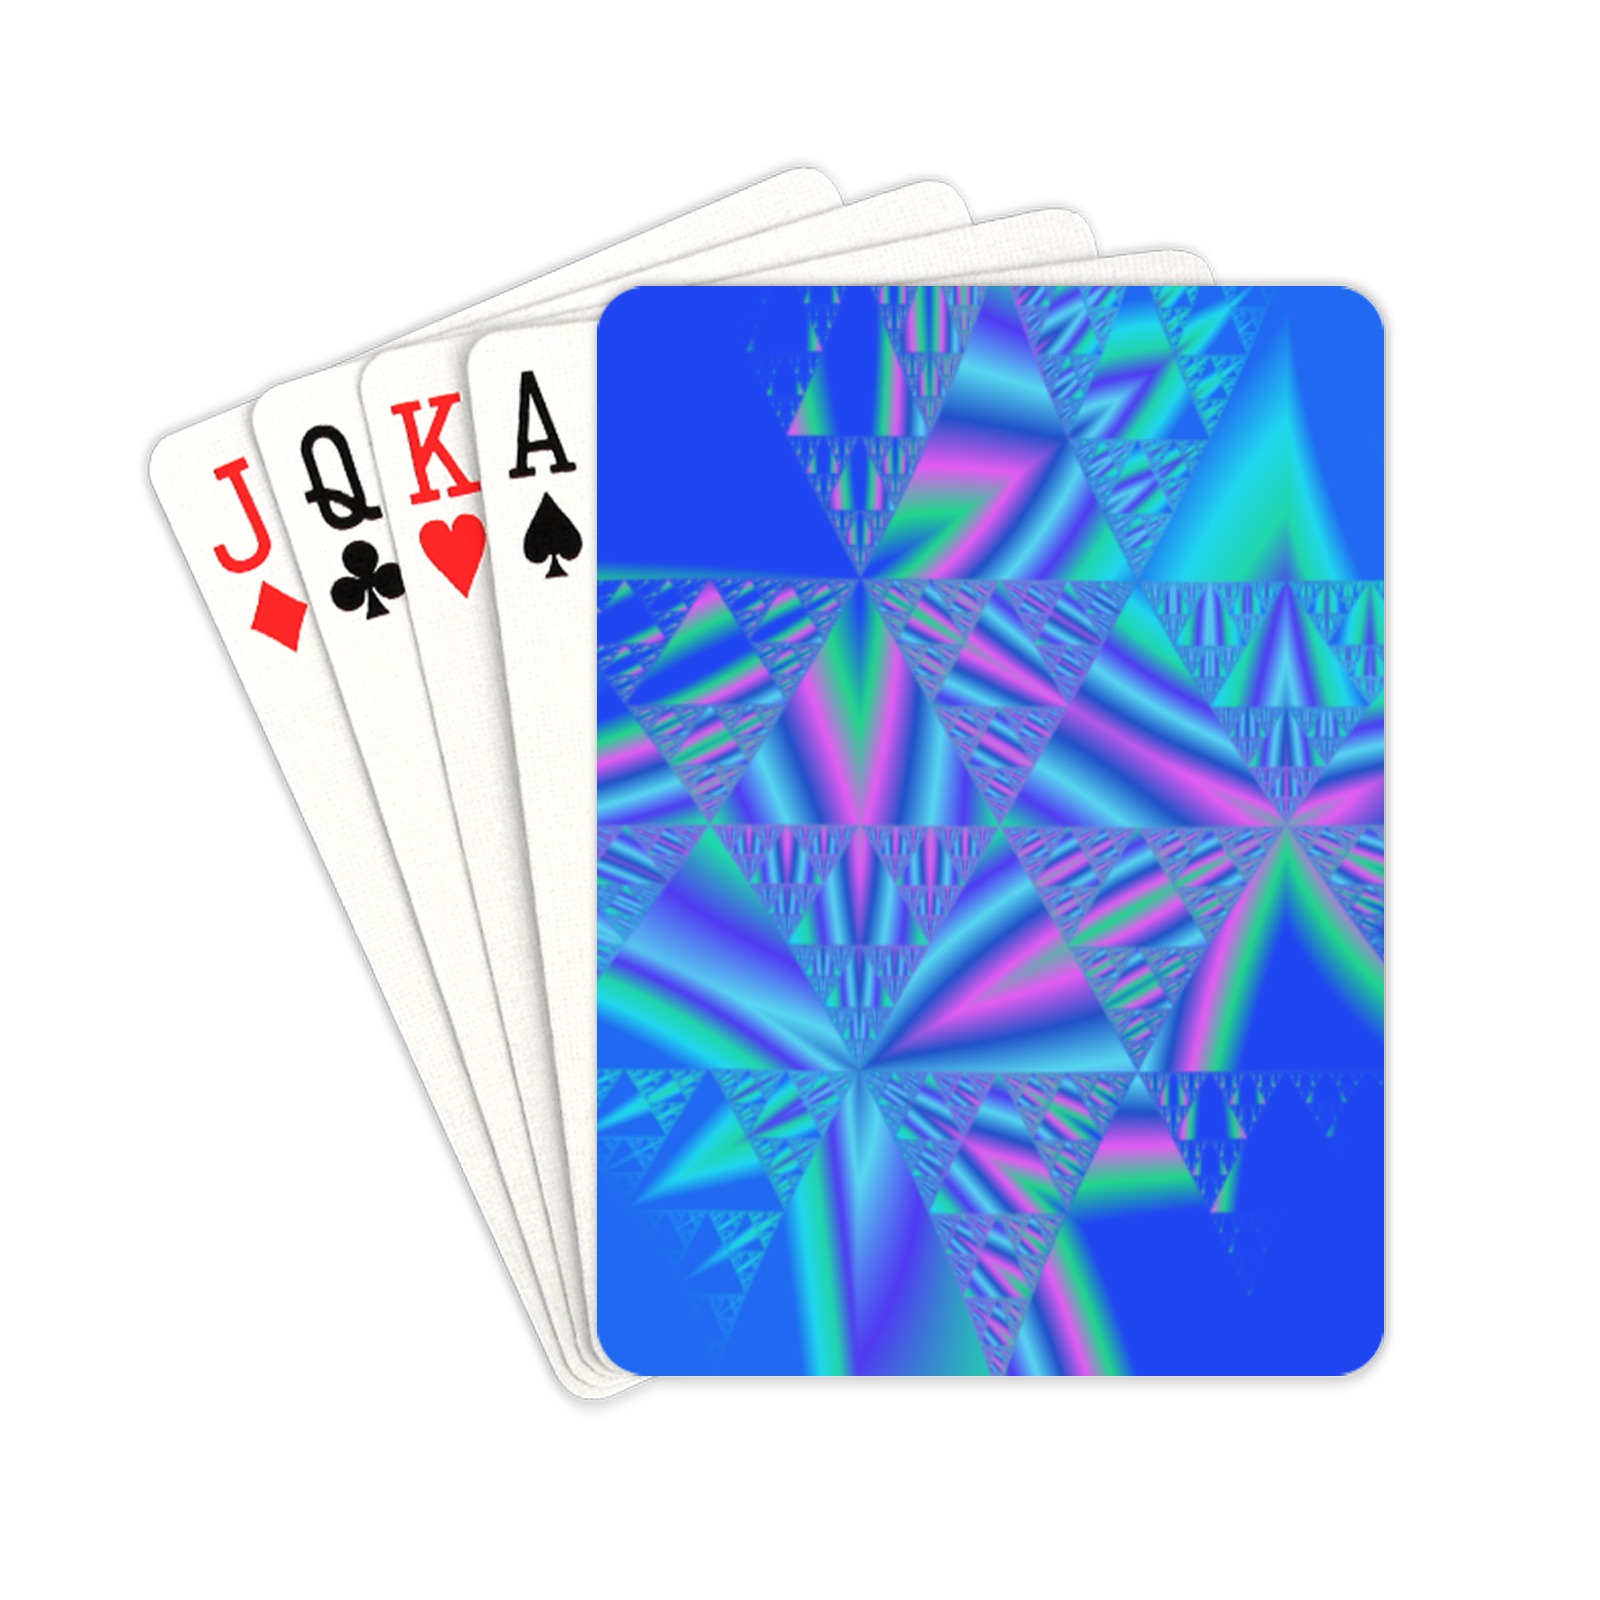 Blue Fractal Crystals Playing Cards 2.5"x3.5"